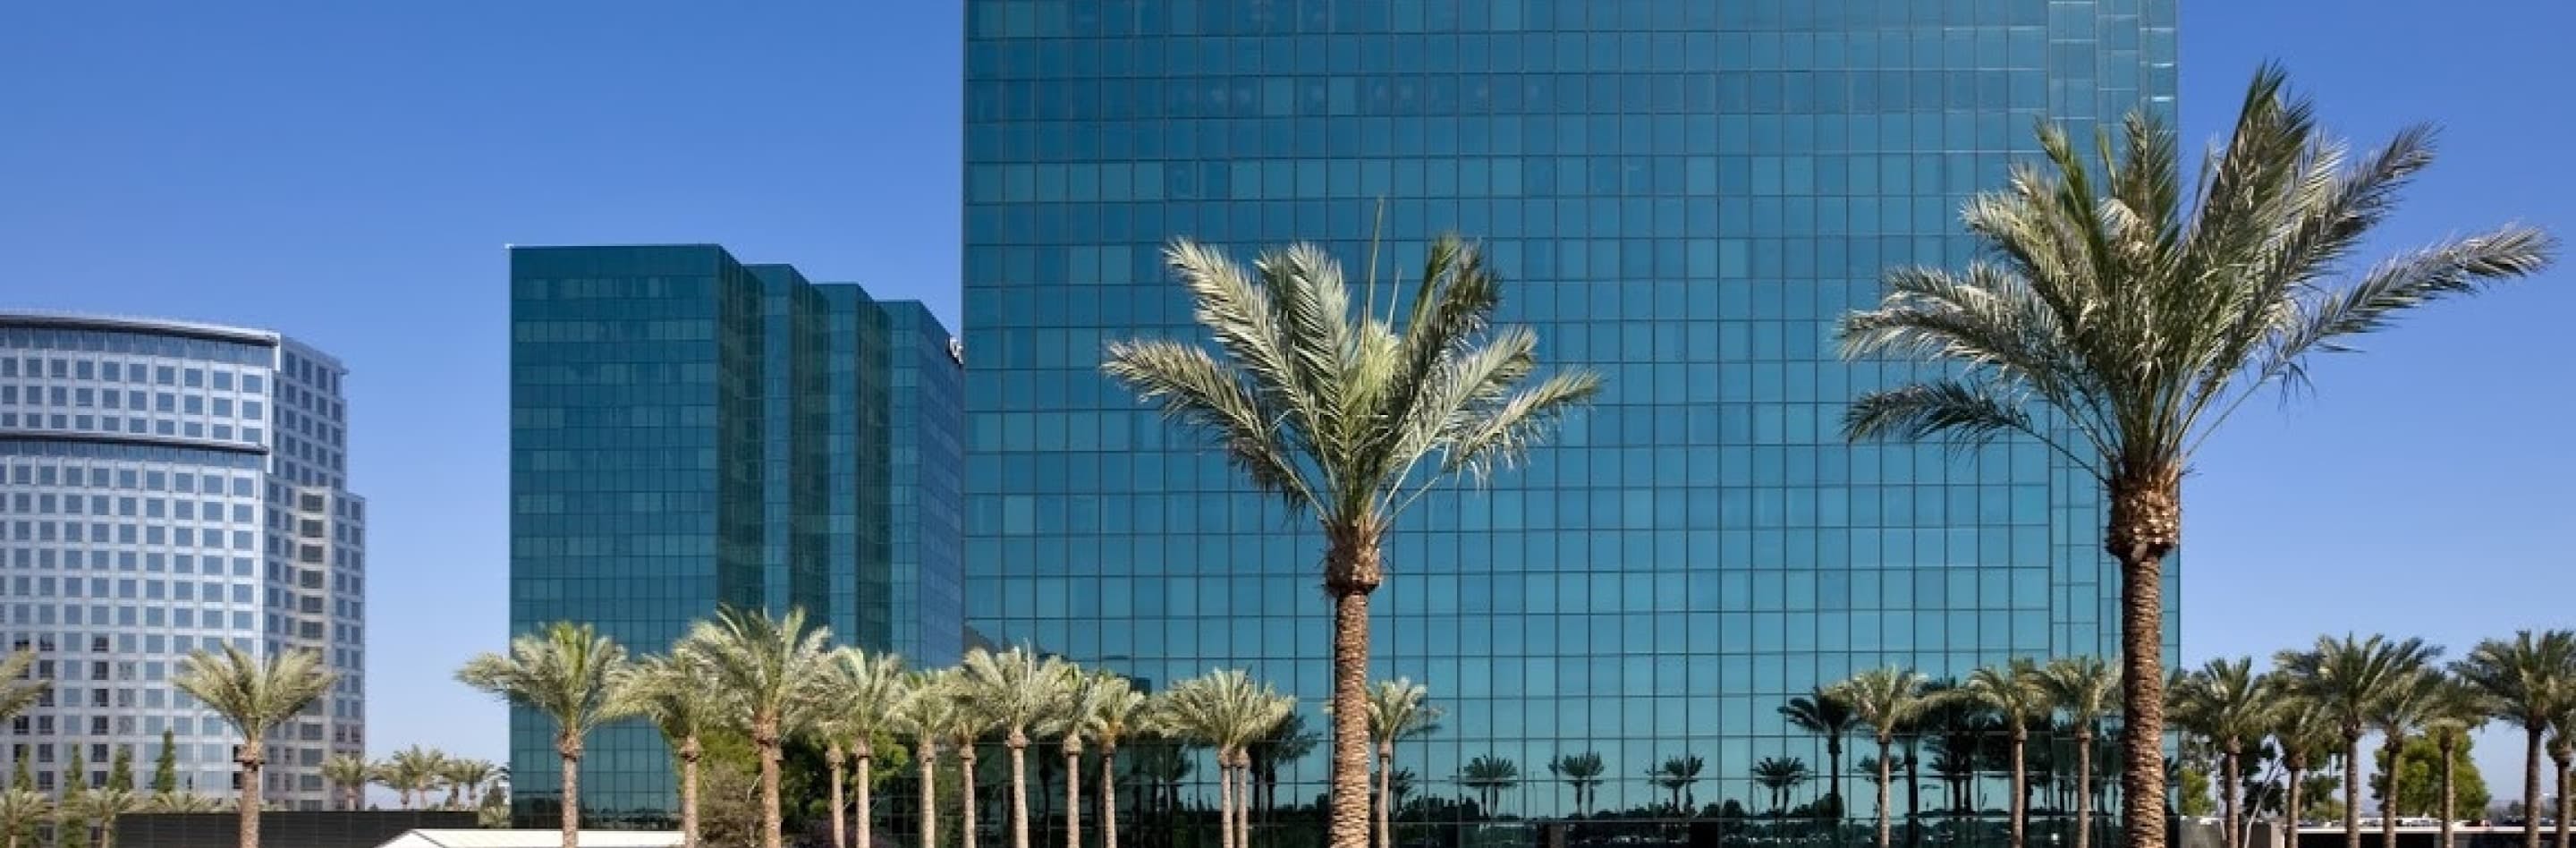 buildings in the background with palm trees in the foreground